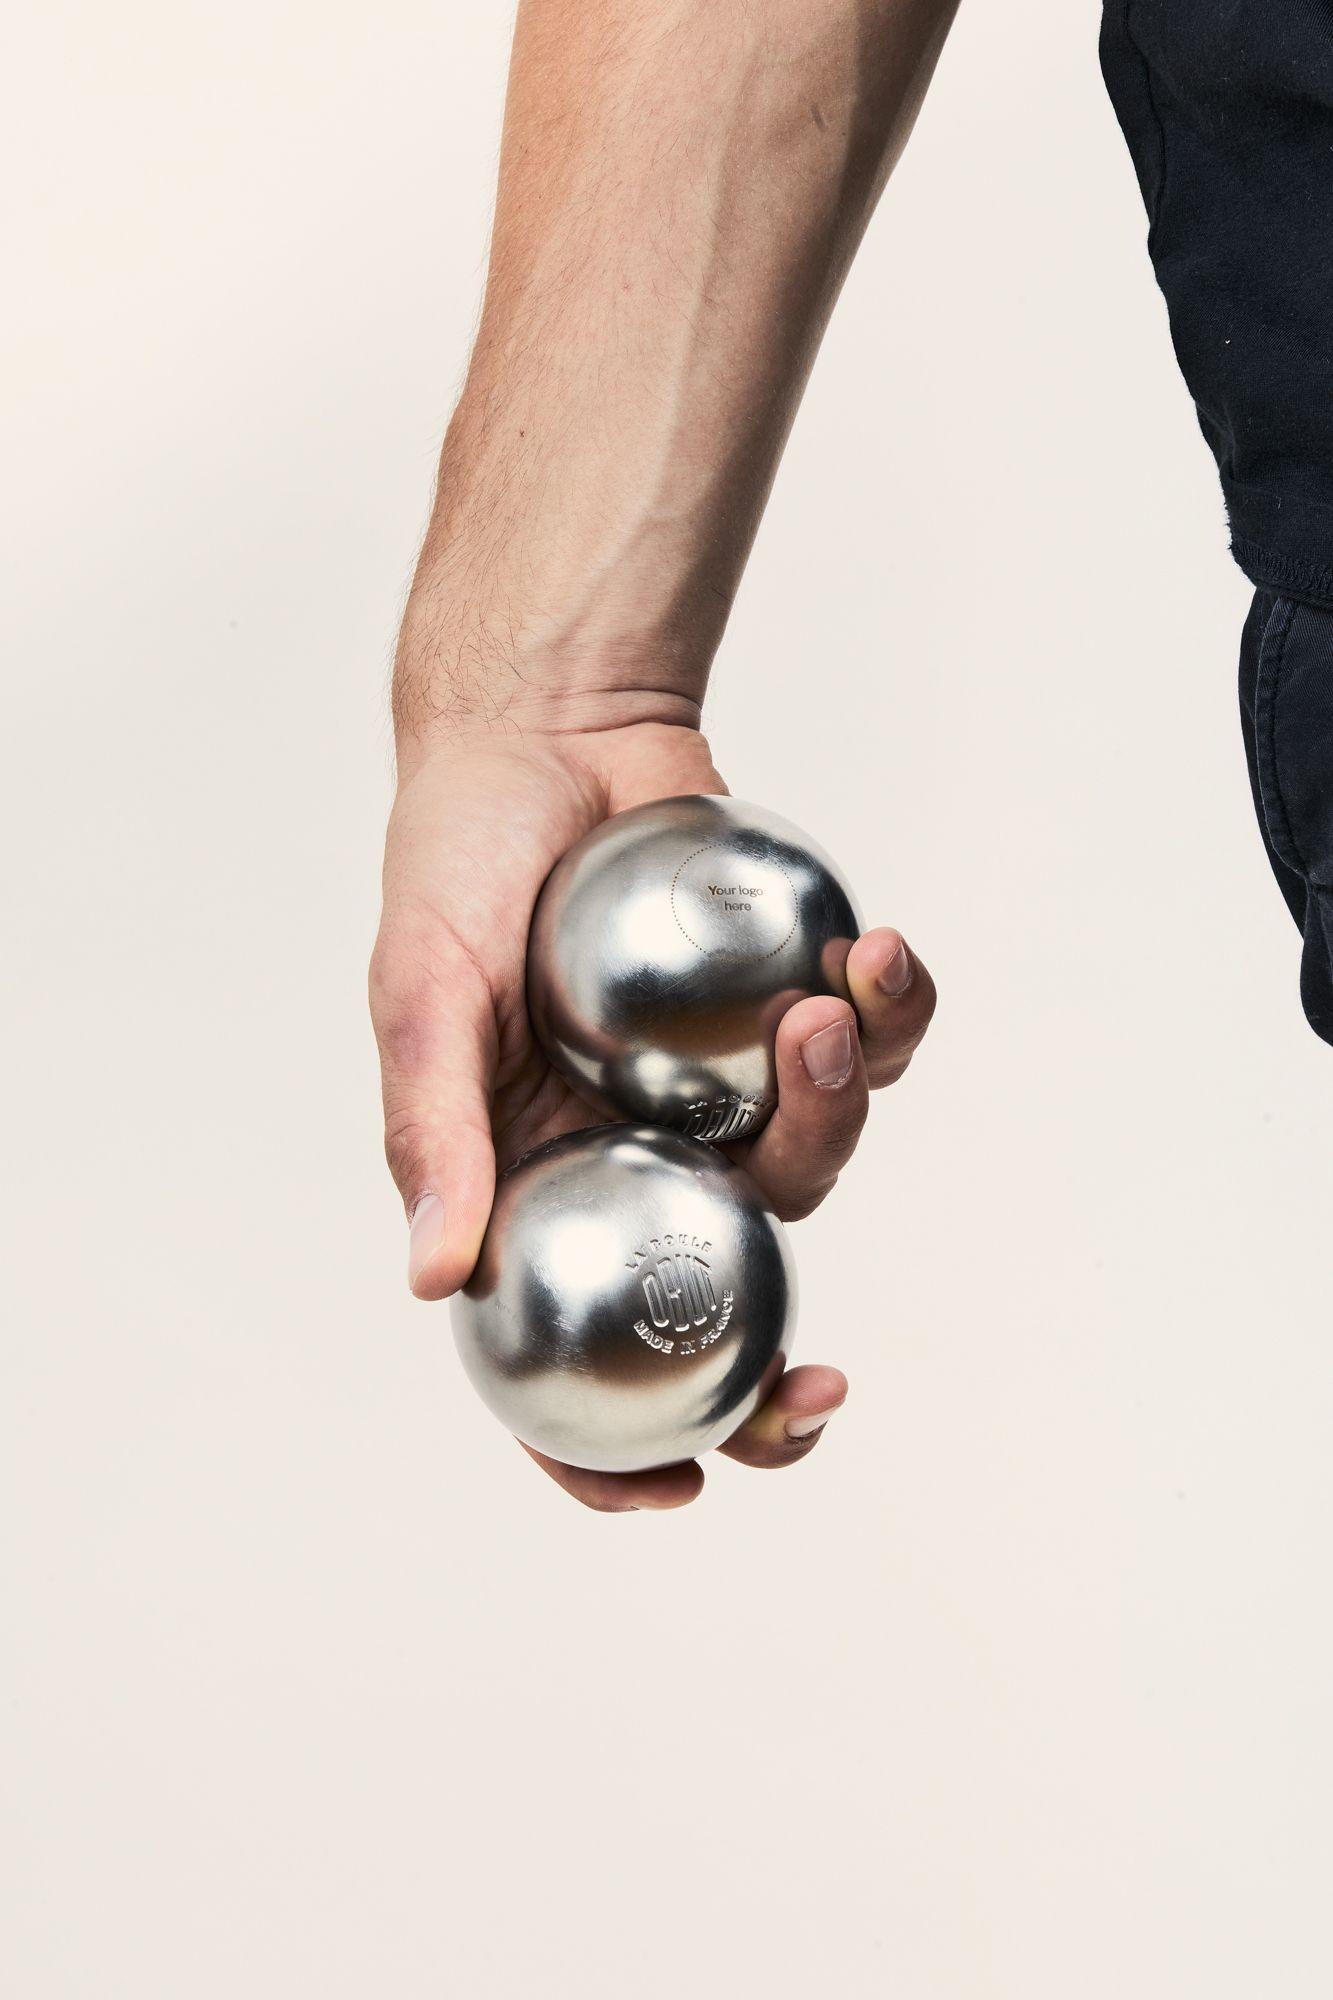 Custom boules Obut for petanque lovers! 